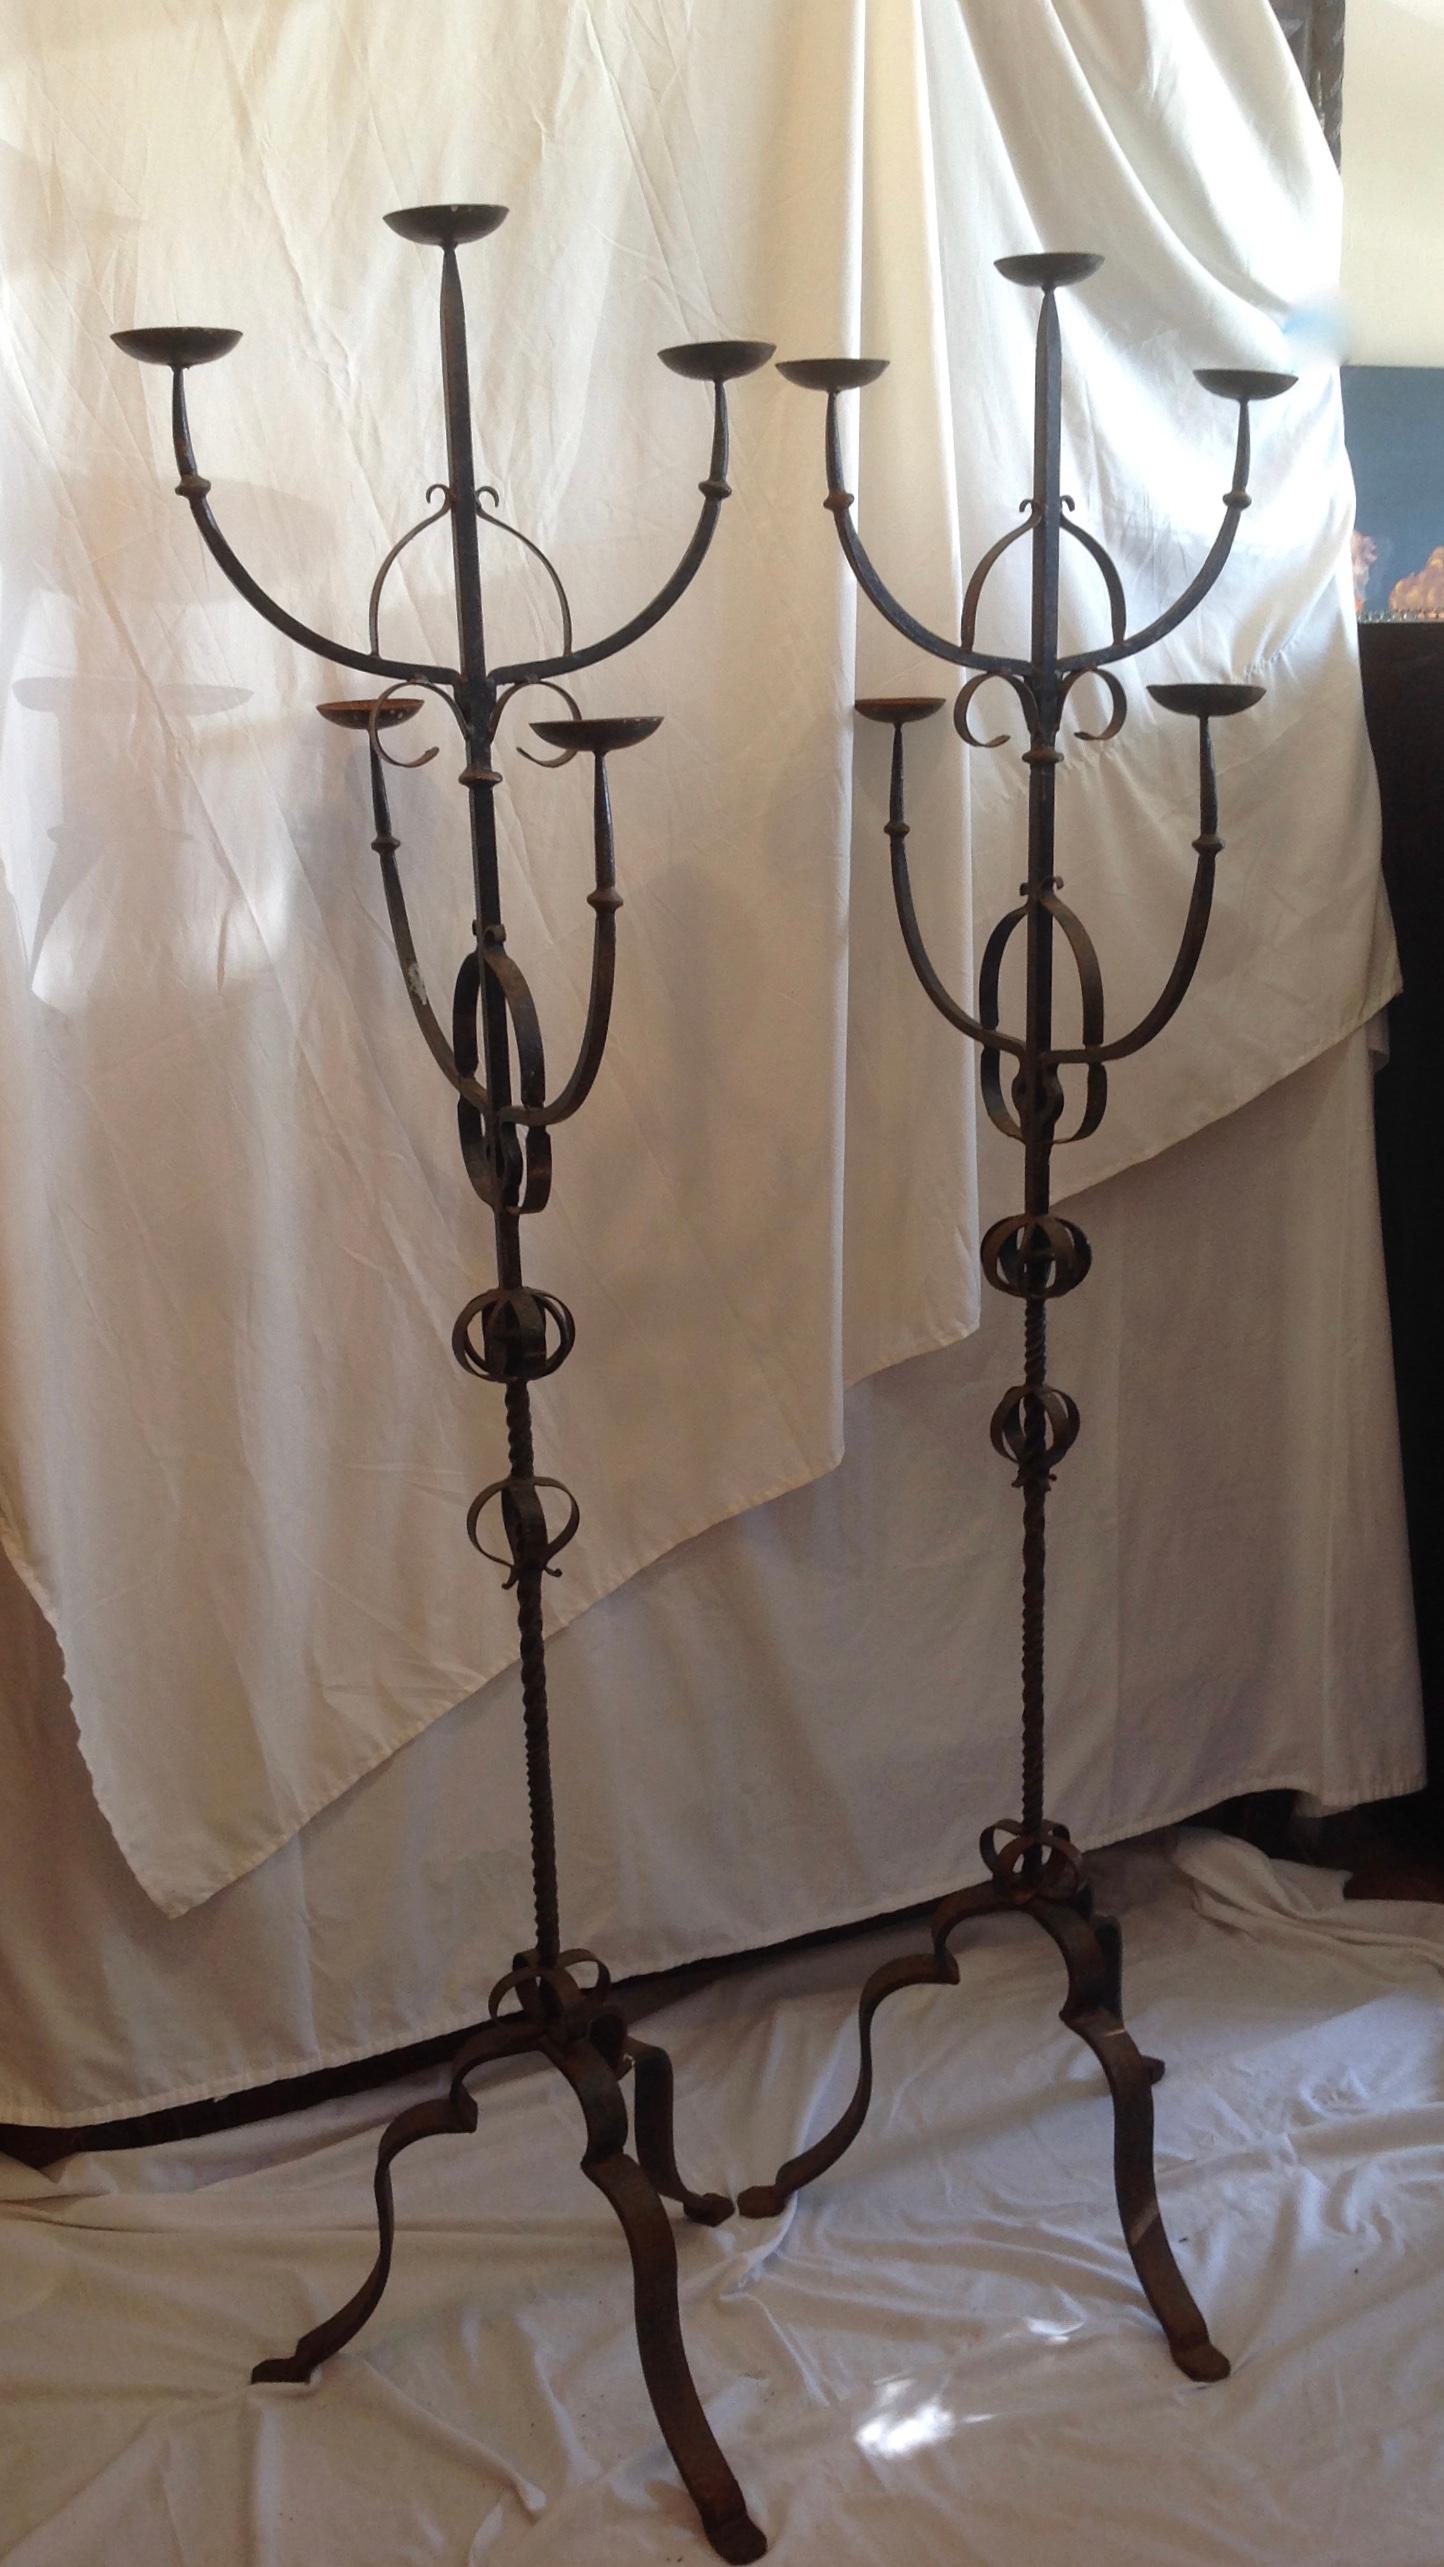 19th Century French Iron Standing Floor Candelabras with Three Arms, a ...